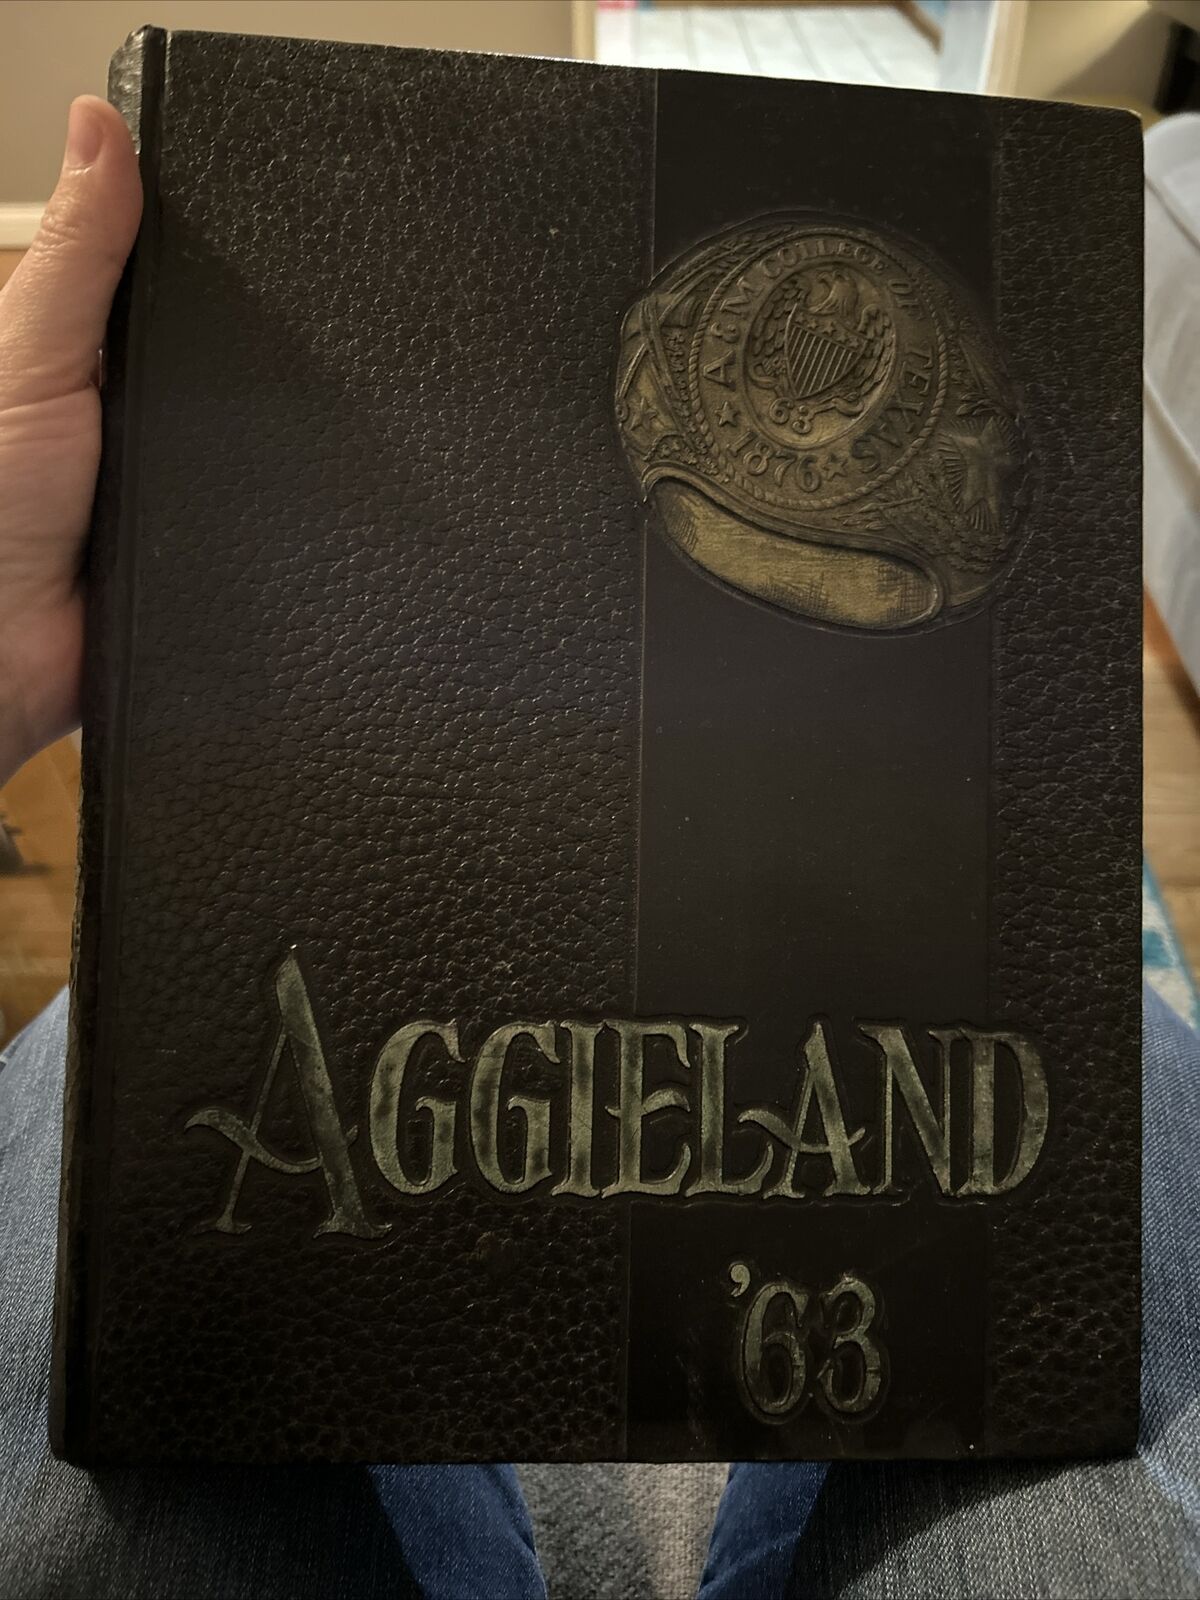 Texas A&M Vintage Yearbook - Aggieland 1963